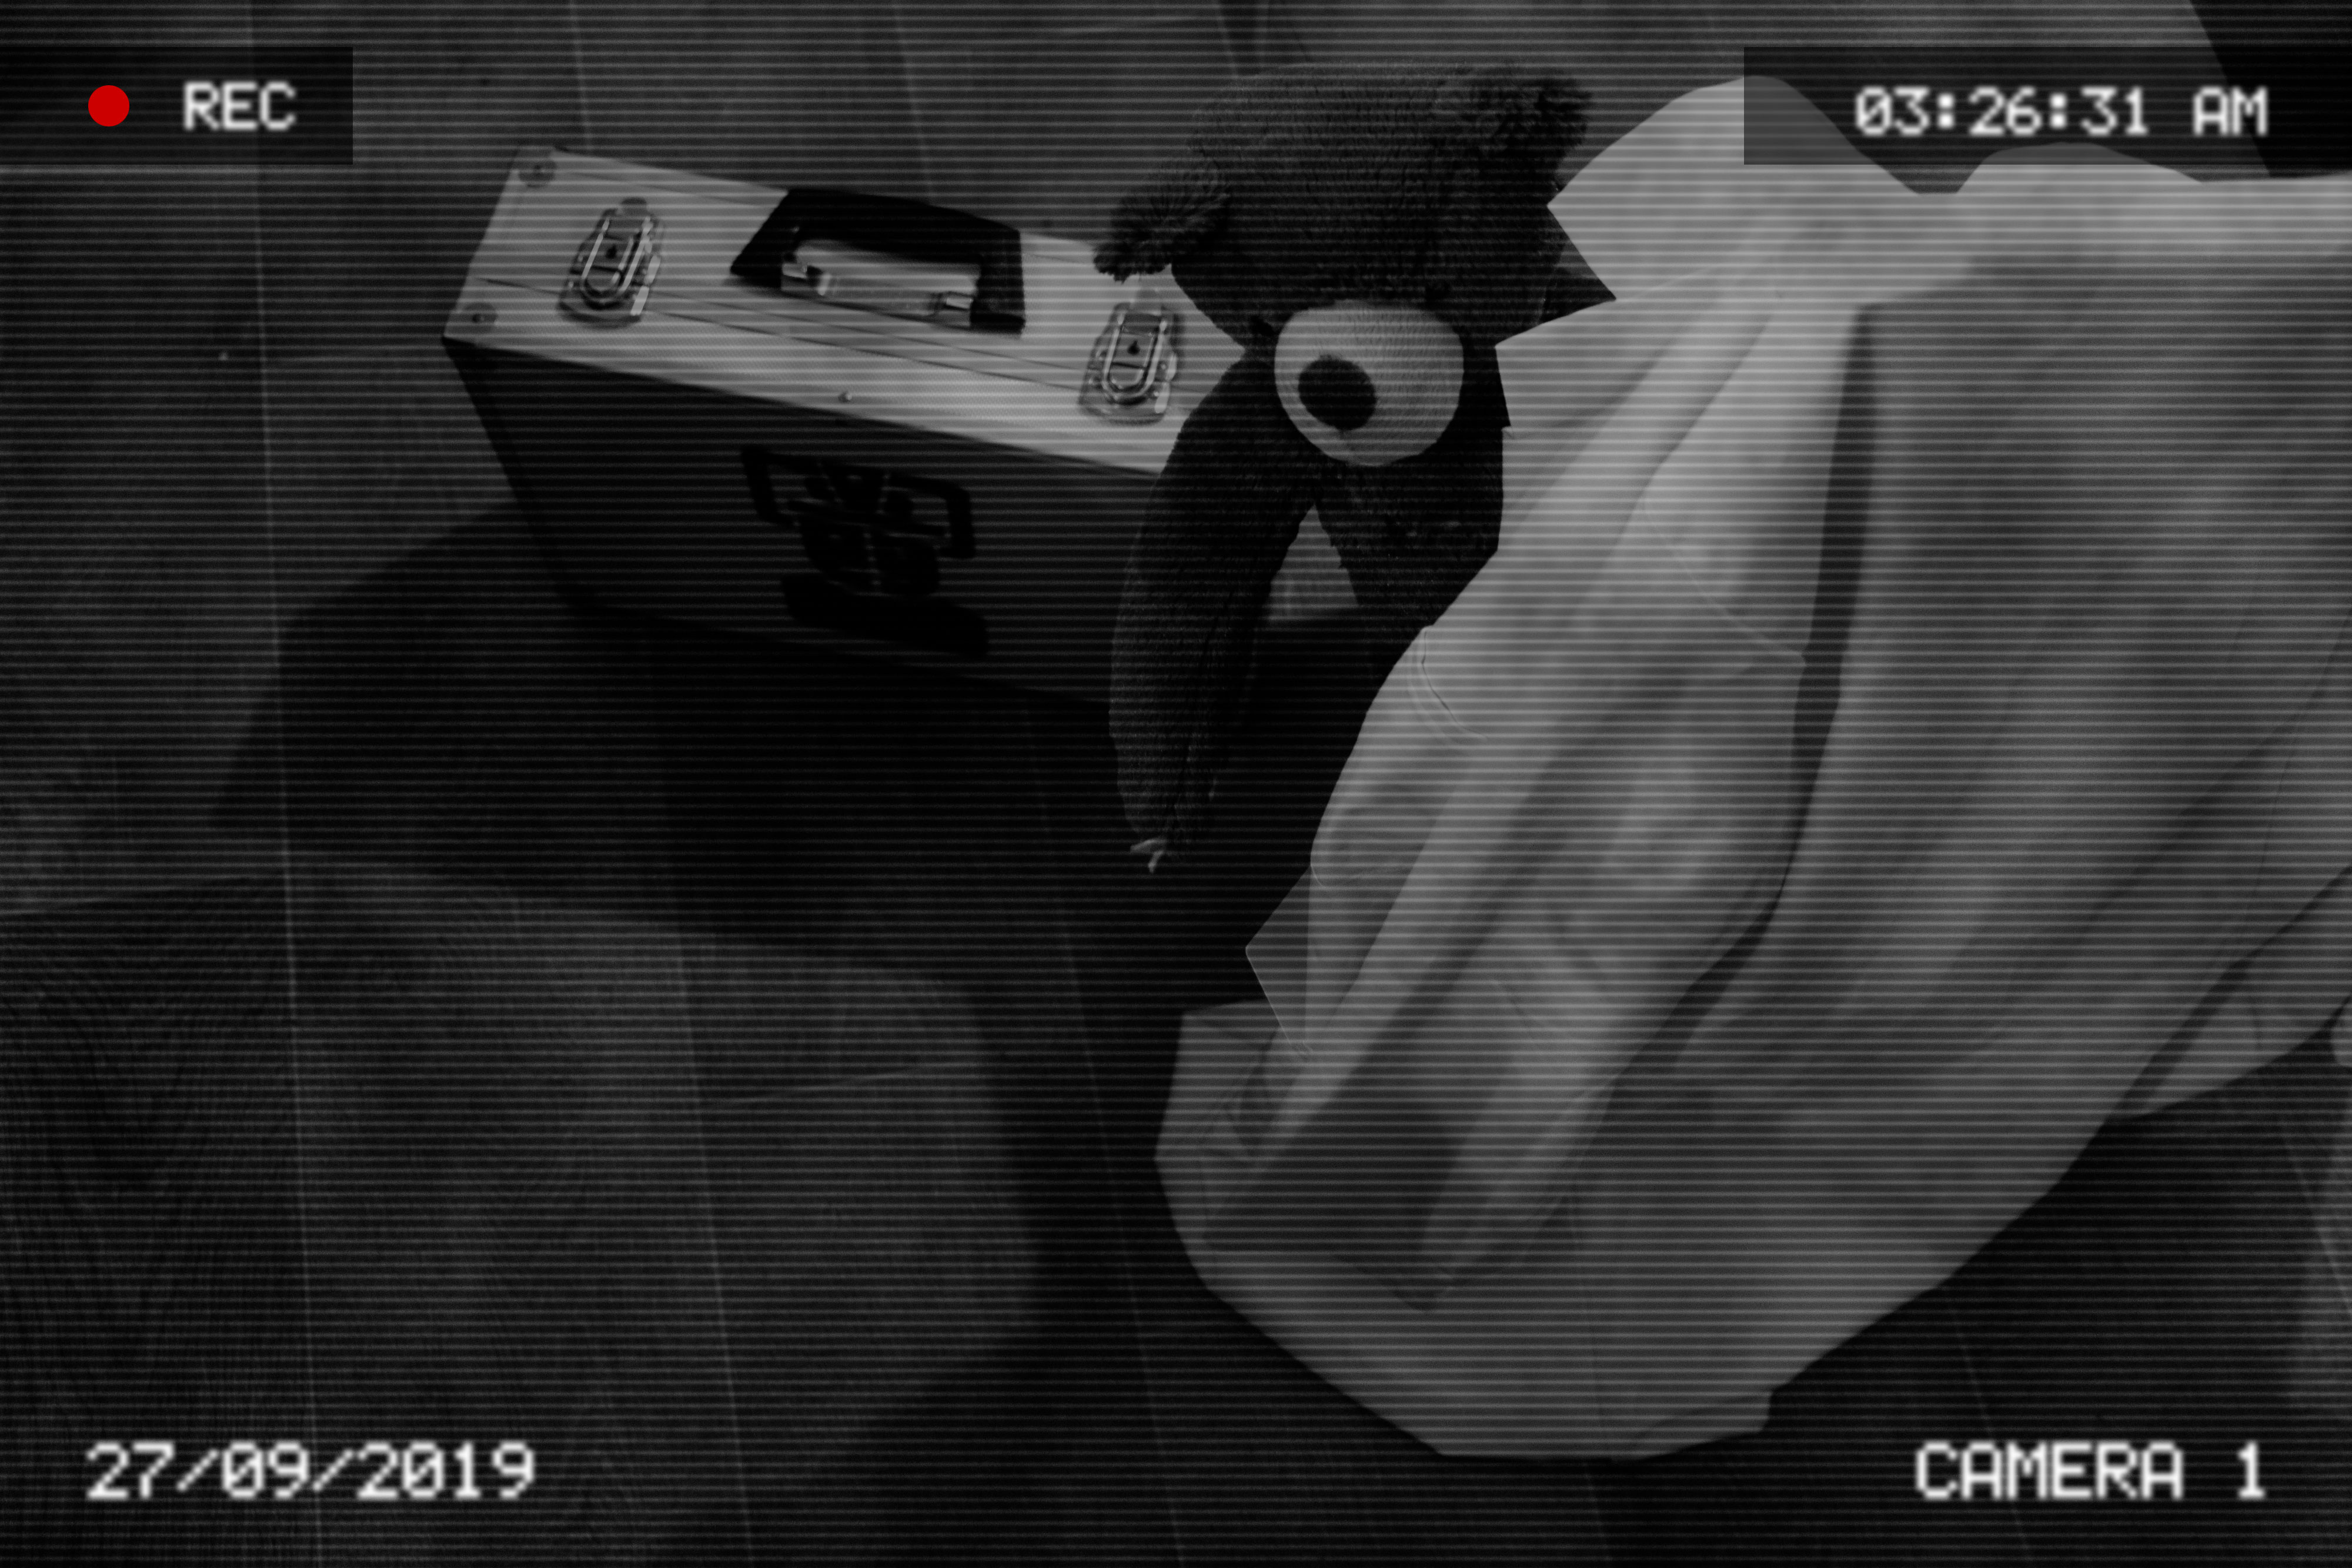 A teddy bear peaks out from behind cover near a silver case. The image appears to be from CCTV as it is interlaced and has a date stamp, a time stamp and the text "CAMERA !" embedded in it along with a record icon in the top left